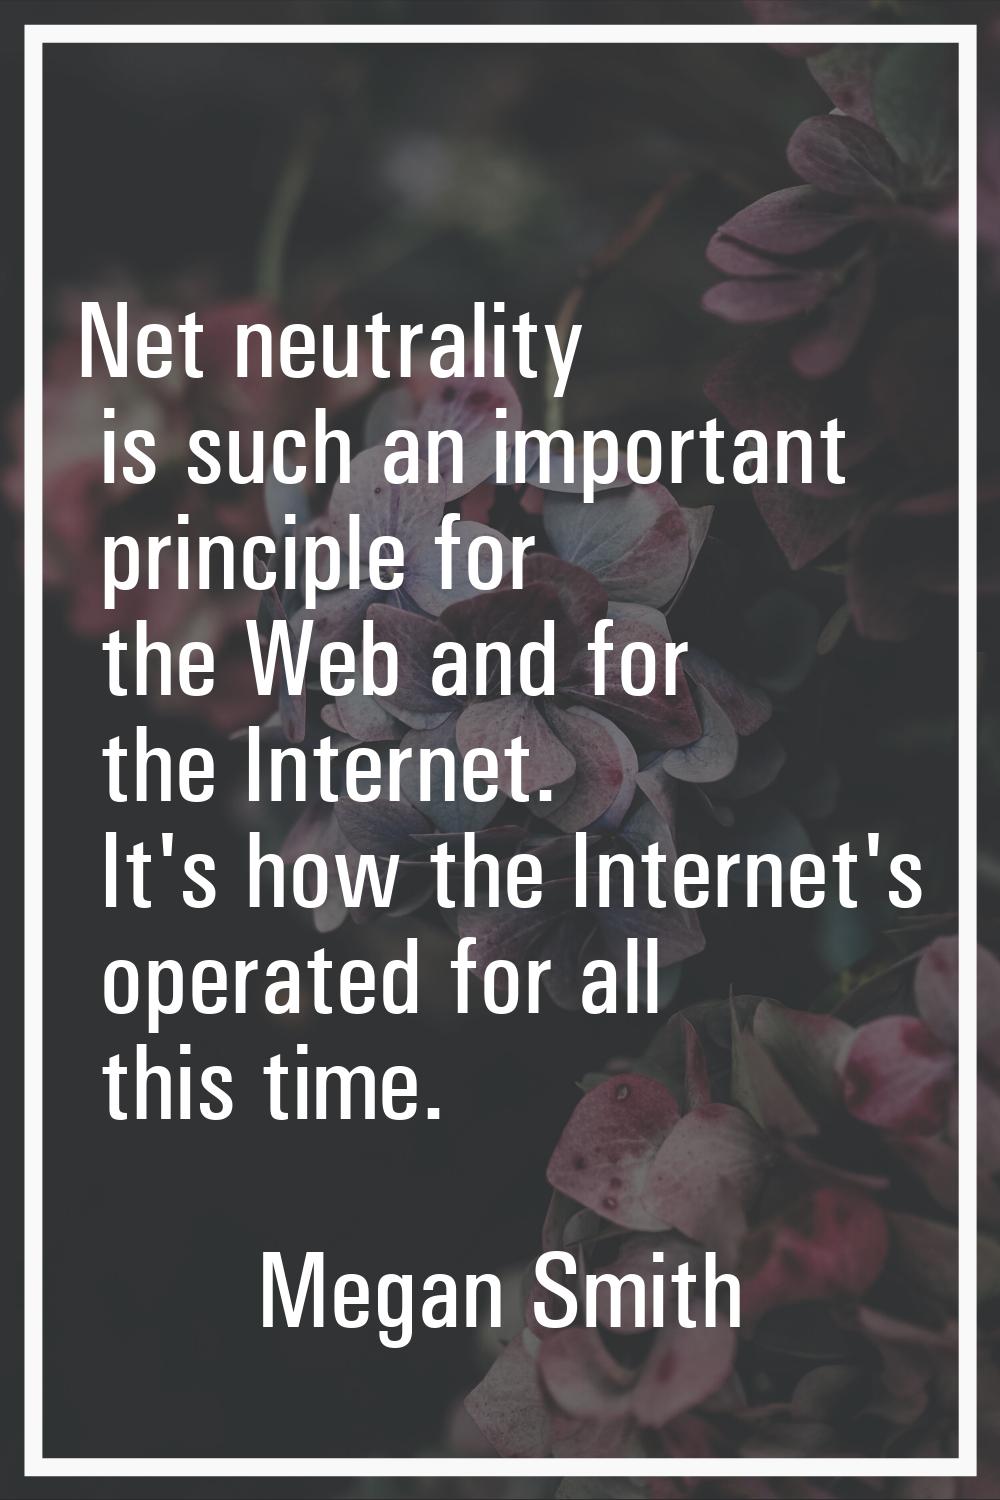 Net neutrality is such an important principle for the Web and for the Internet. It's how the Intern